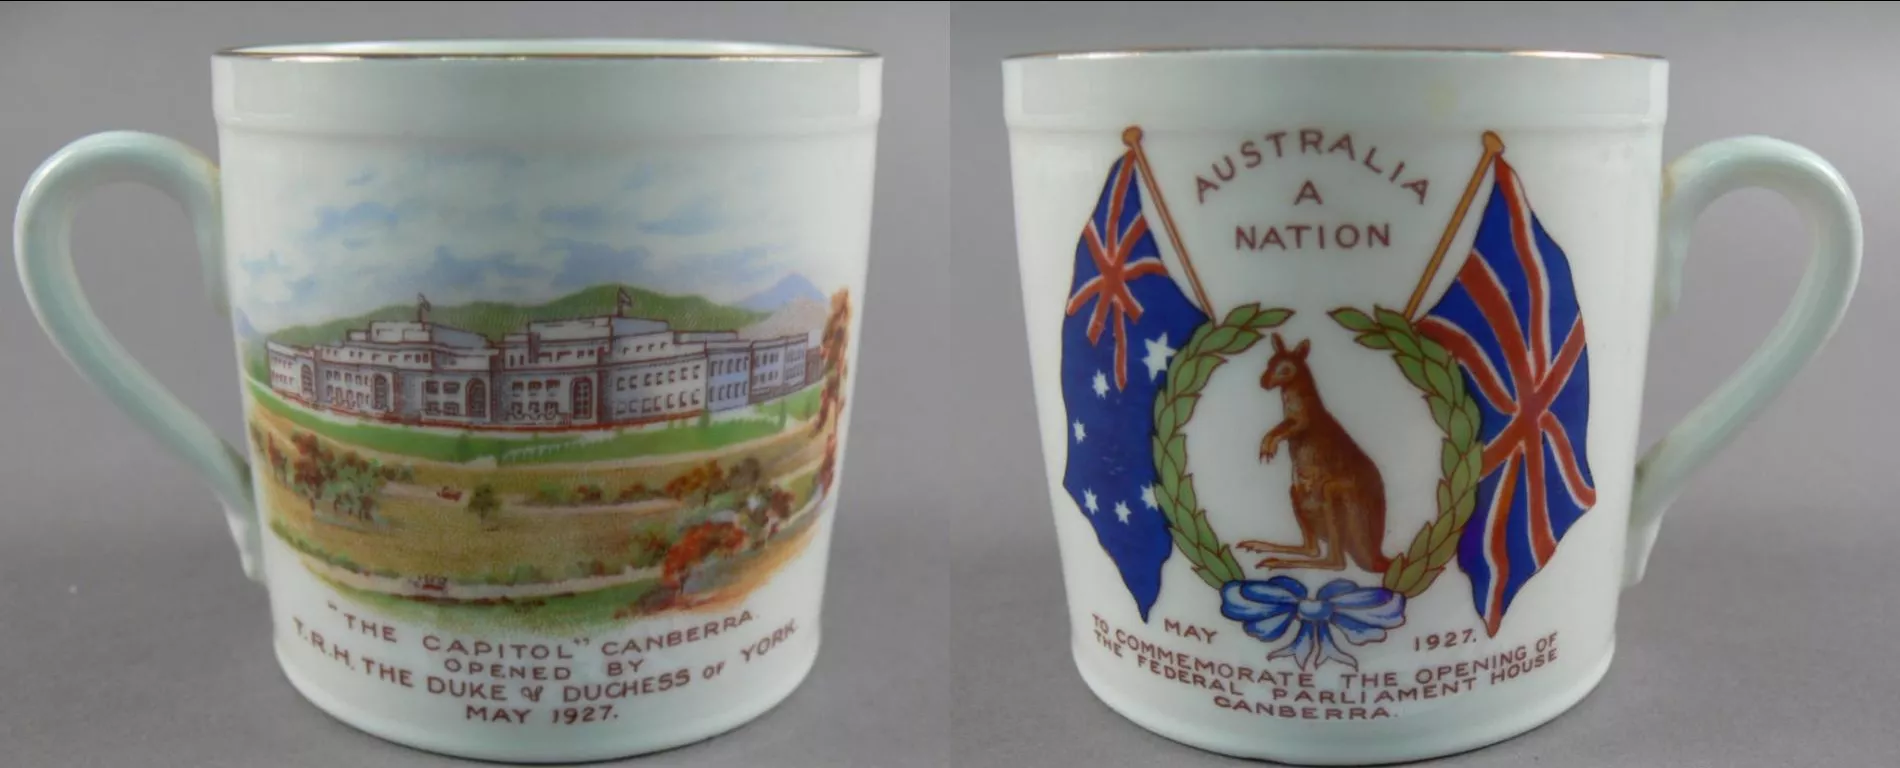 Souvenir mug from 1927, the front depicting parliament house surrounded by green hills and fields, the back showing a wreath with a kangaroo and the Australian and UK flags.